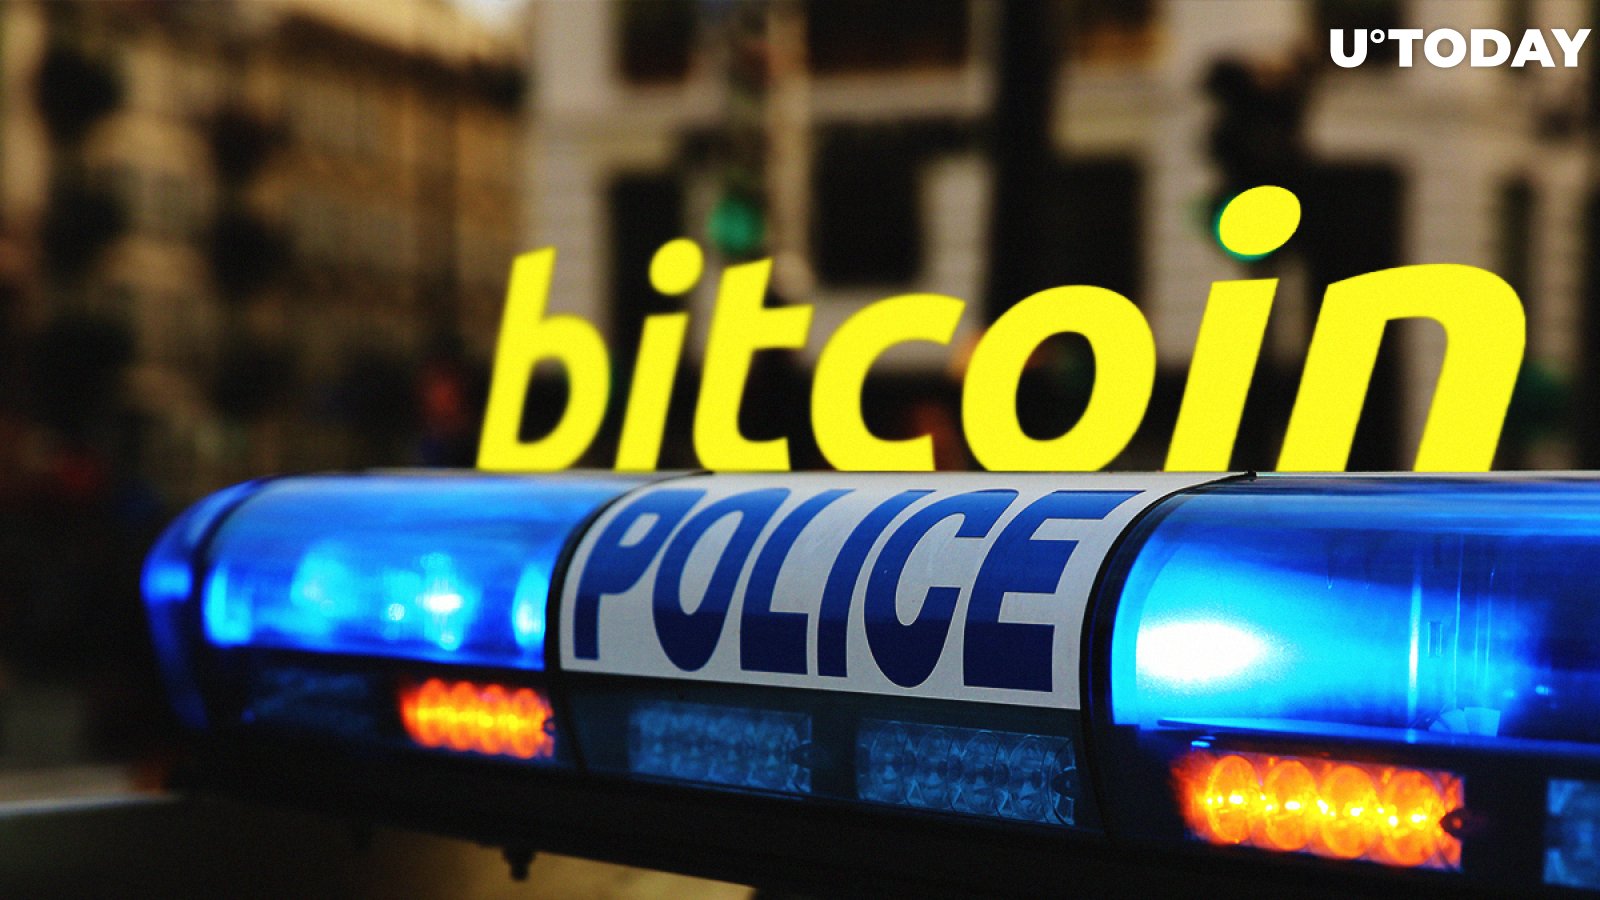 BTC Private Keys to €53.6 Mln in Bitcoin Missing, Police Can’t Access Drug Cash